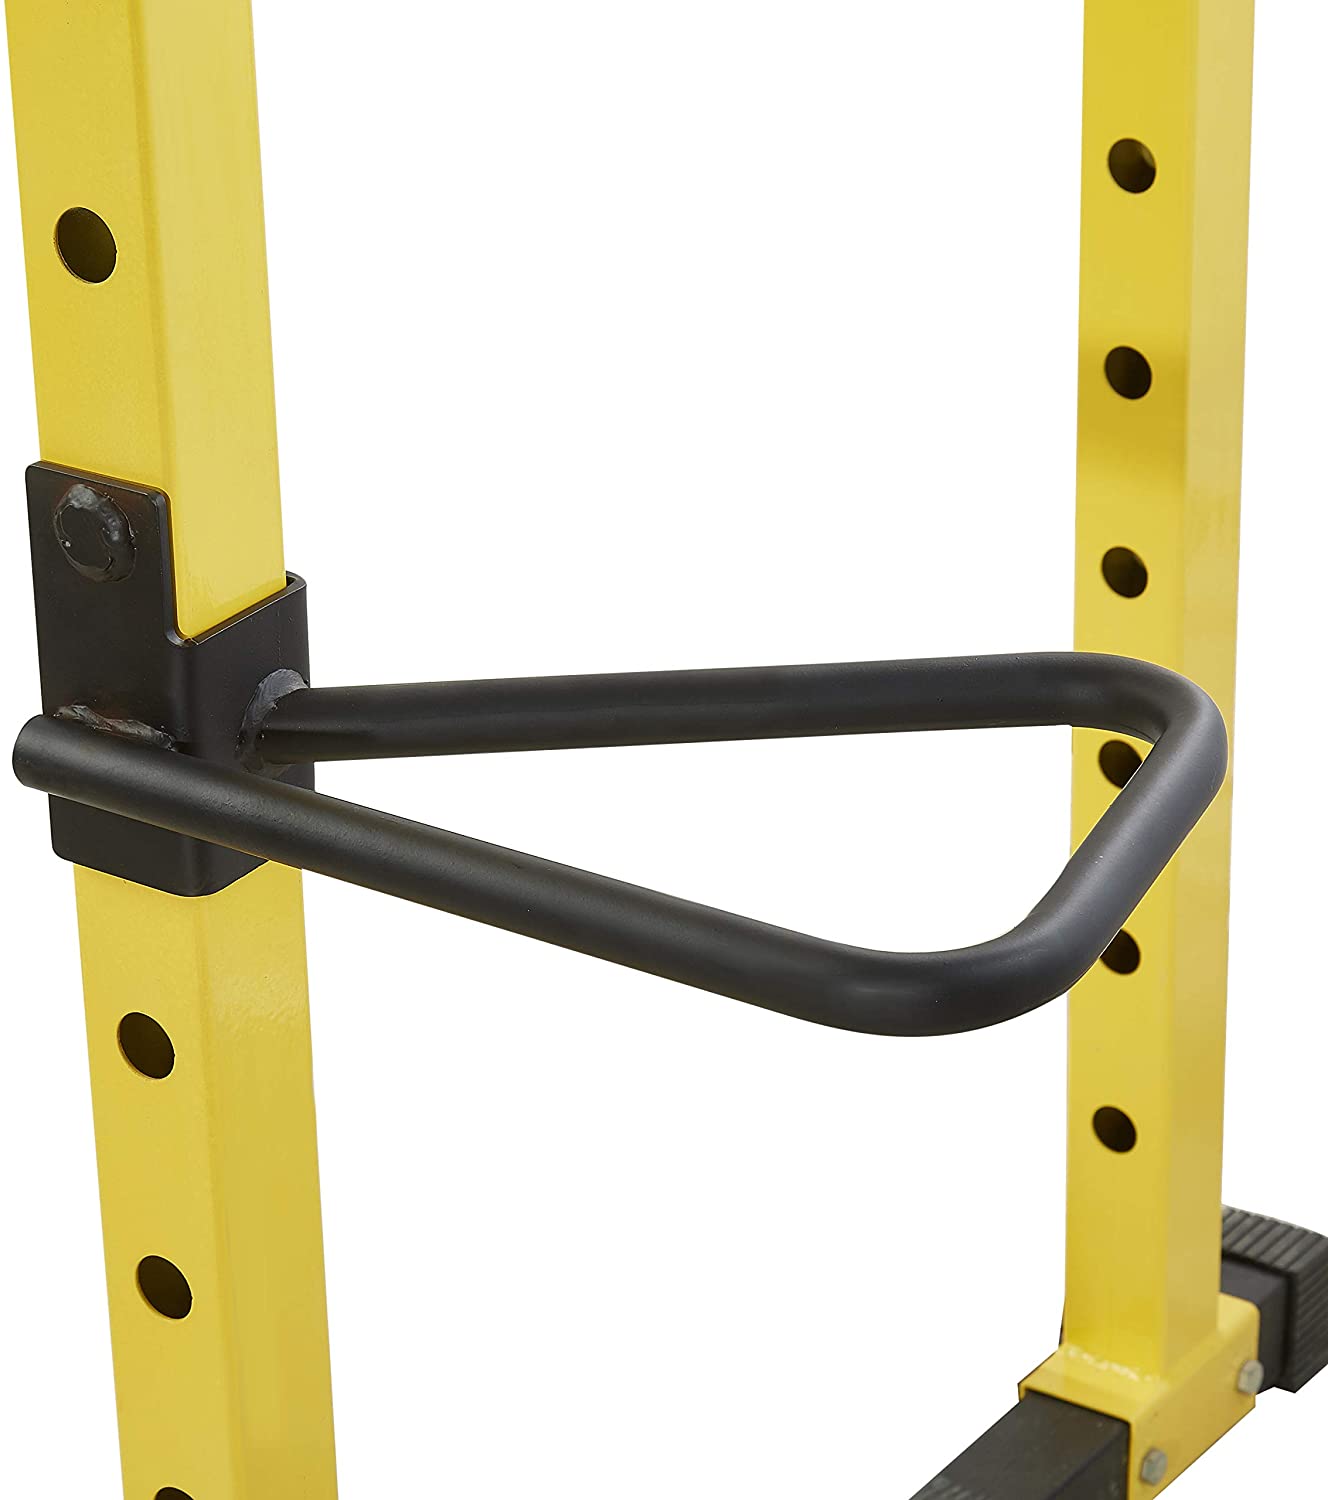 Gym; Home Gym; Garage Gym; Sports; Workout; Attachments; Accessories; Power Cage; Power Rack; Squat Stand; Squat Rack; J Hooks; Spotter Arms; Weight Plate Holder; T Bar row; Barbell Collars; Barbell Hangers; Safety Straps